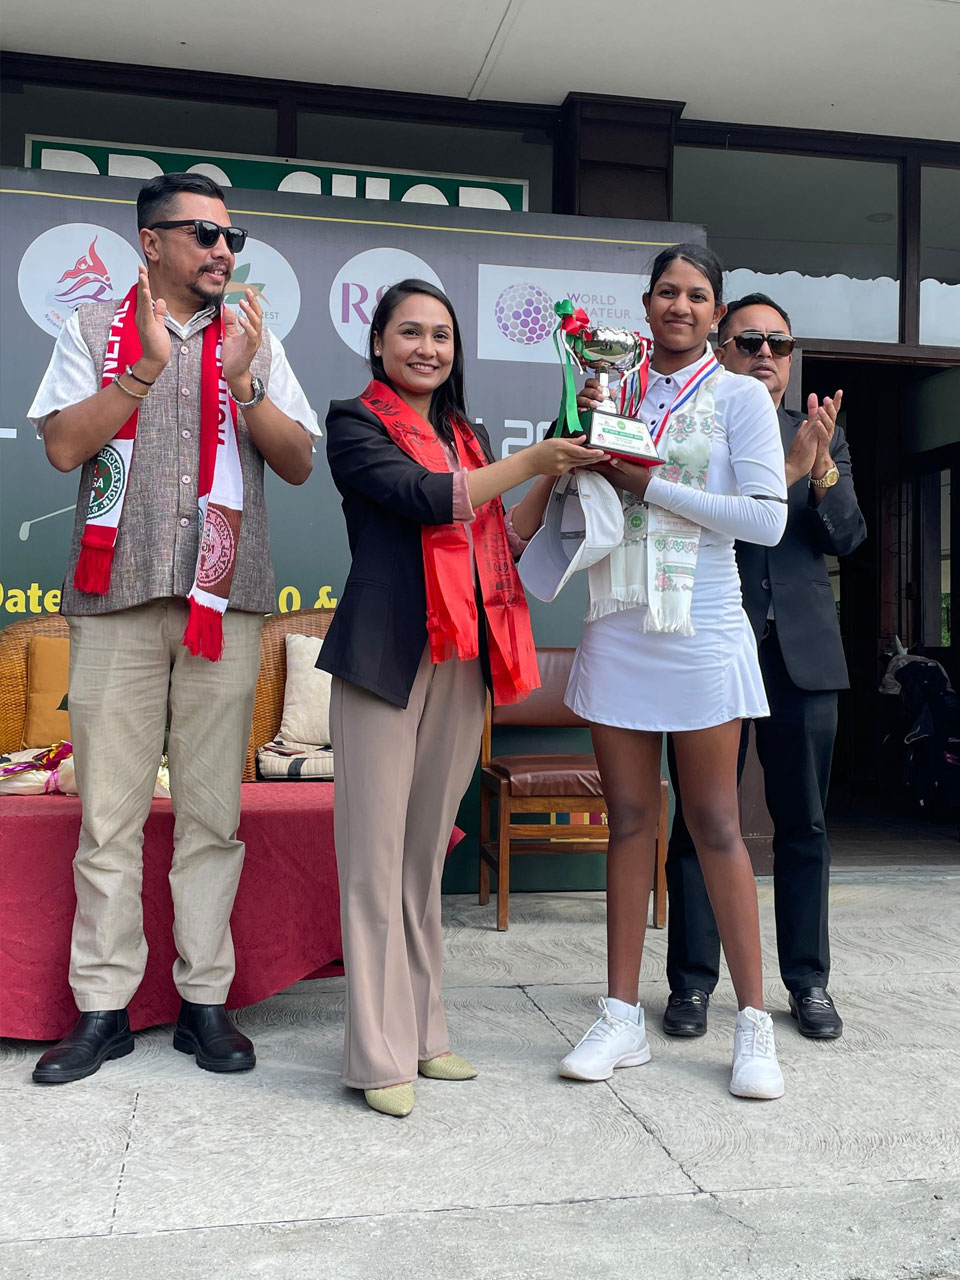 Dia Cris Kumar finished as runner up at the 10th Nepal Amateur Golf Championship in the Ladies category held at Gokarna Forest Resort, Kathmandu.